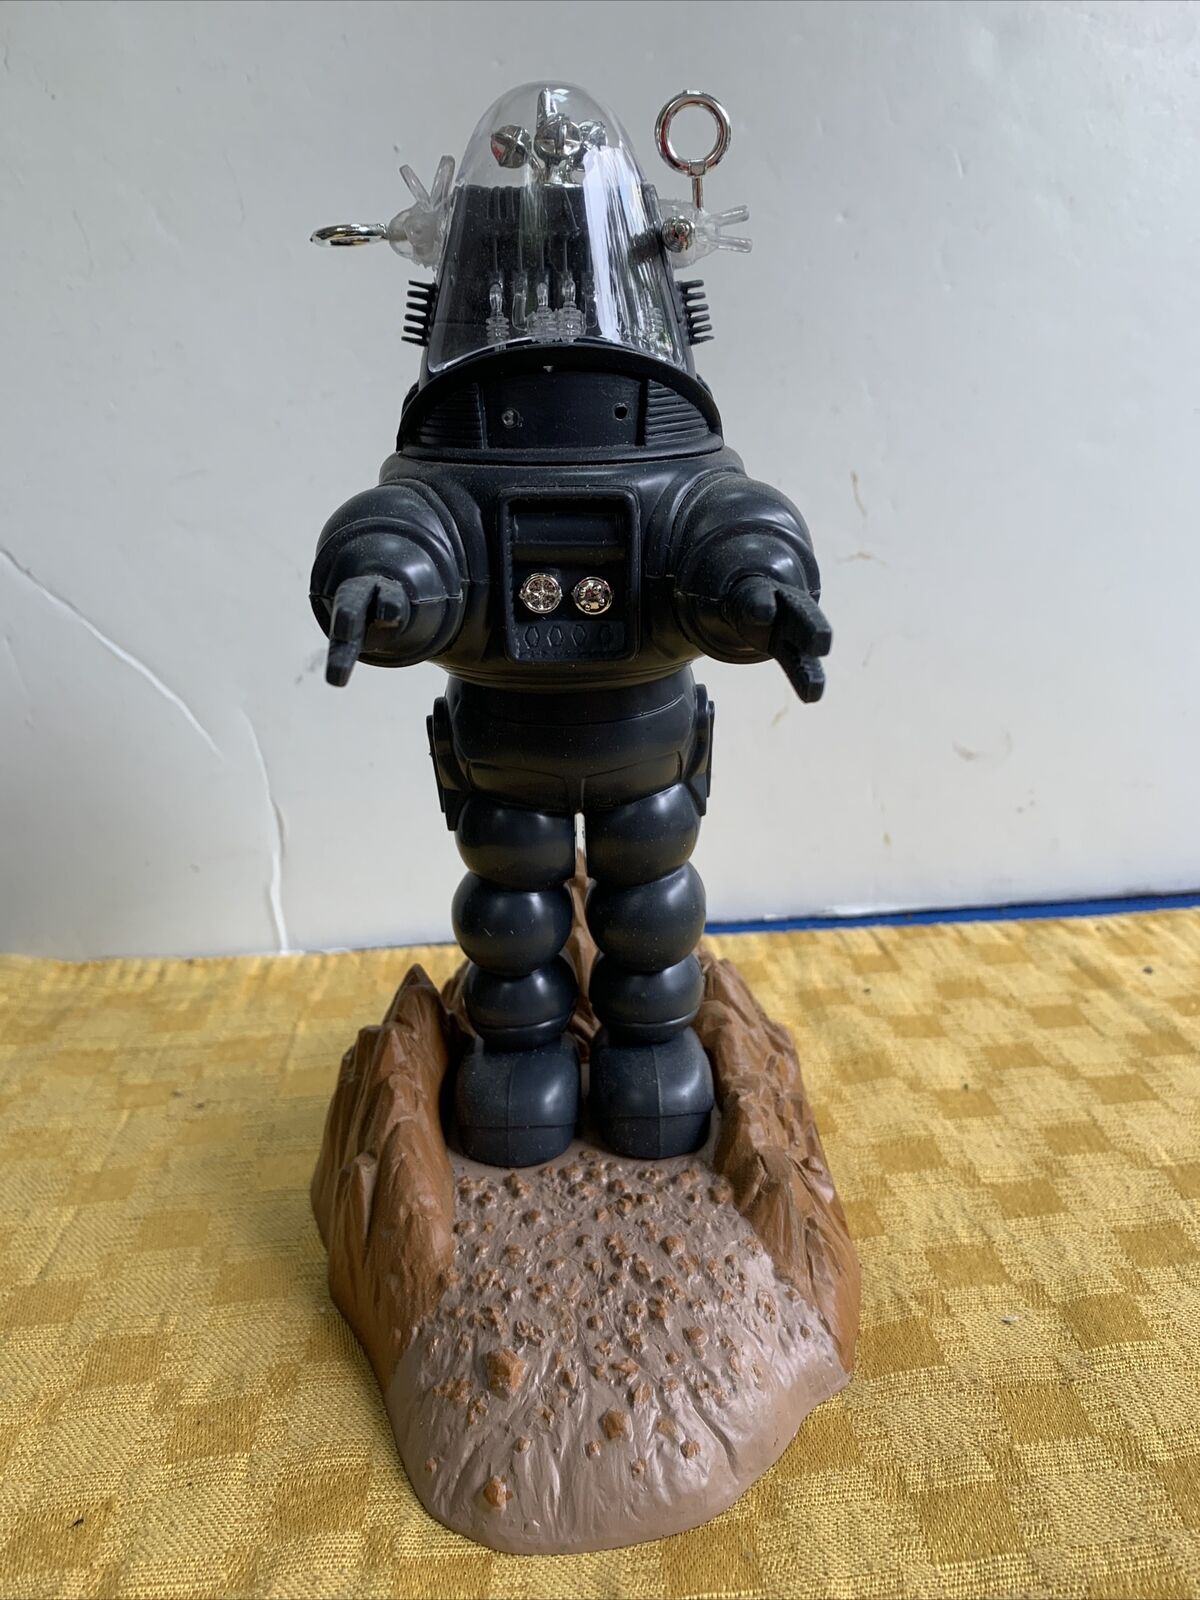 Built Up Robby The Robot From Forbidden Planet - Polar Lights Model